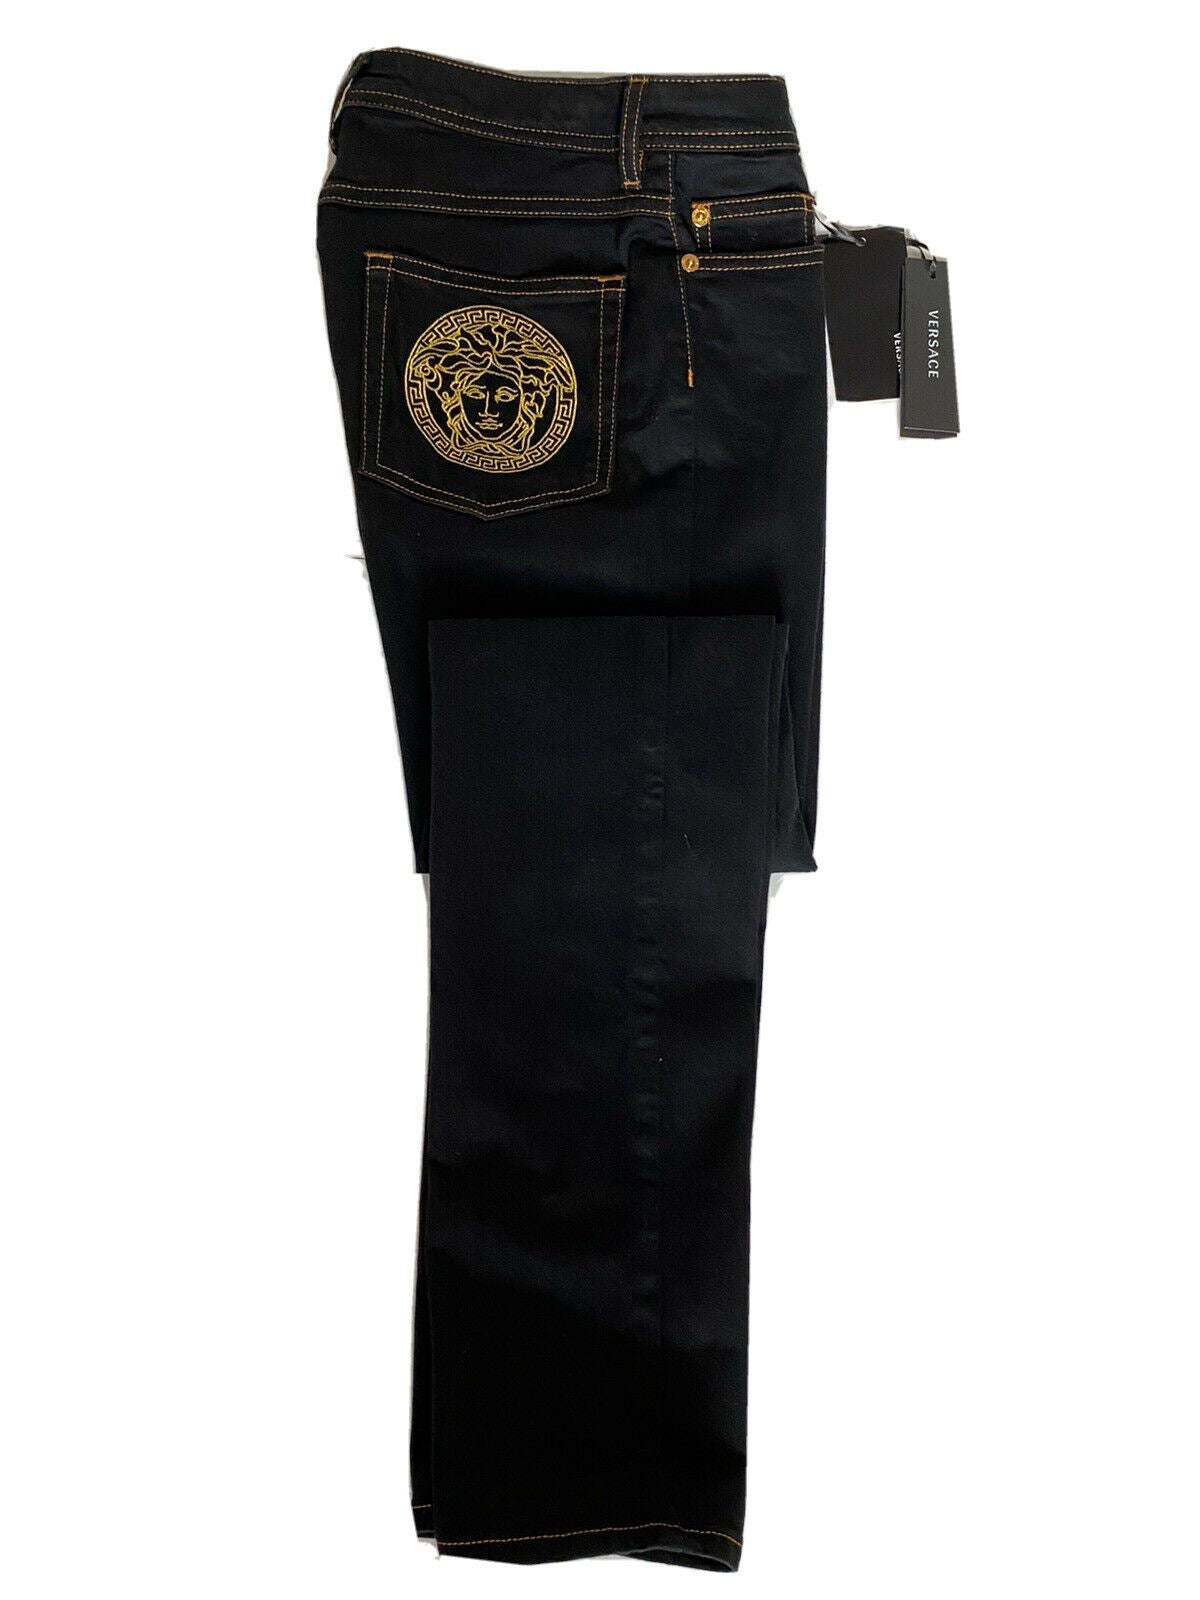 NWT $500 Versace Women's Denim Black Jeans Size 26 US A89556S Made in Italy